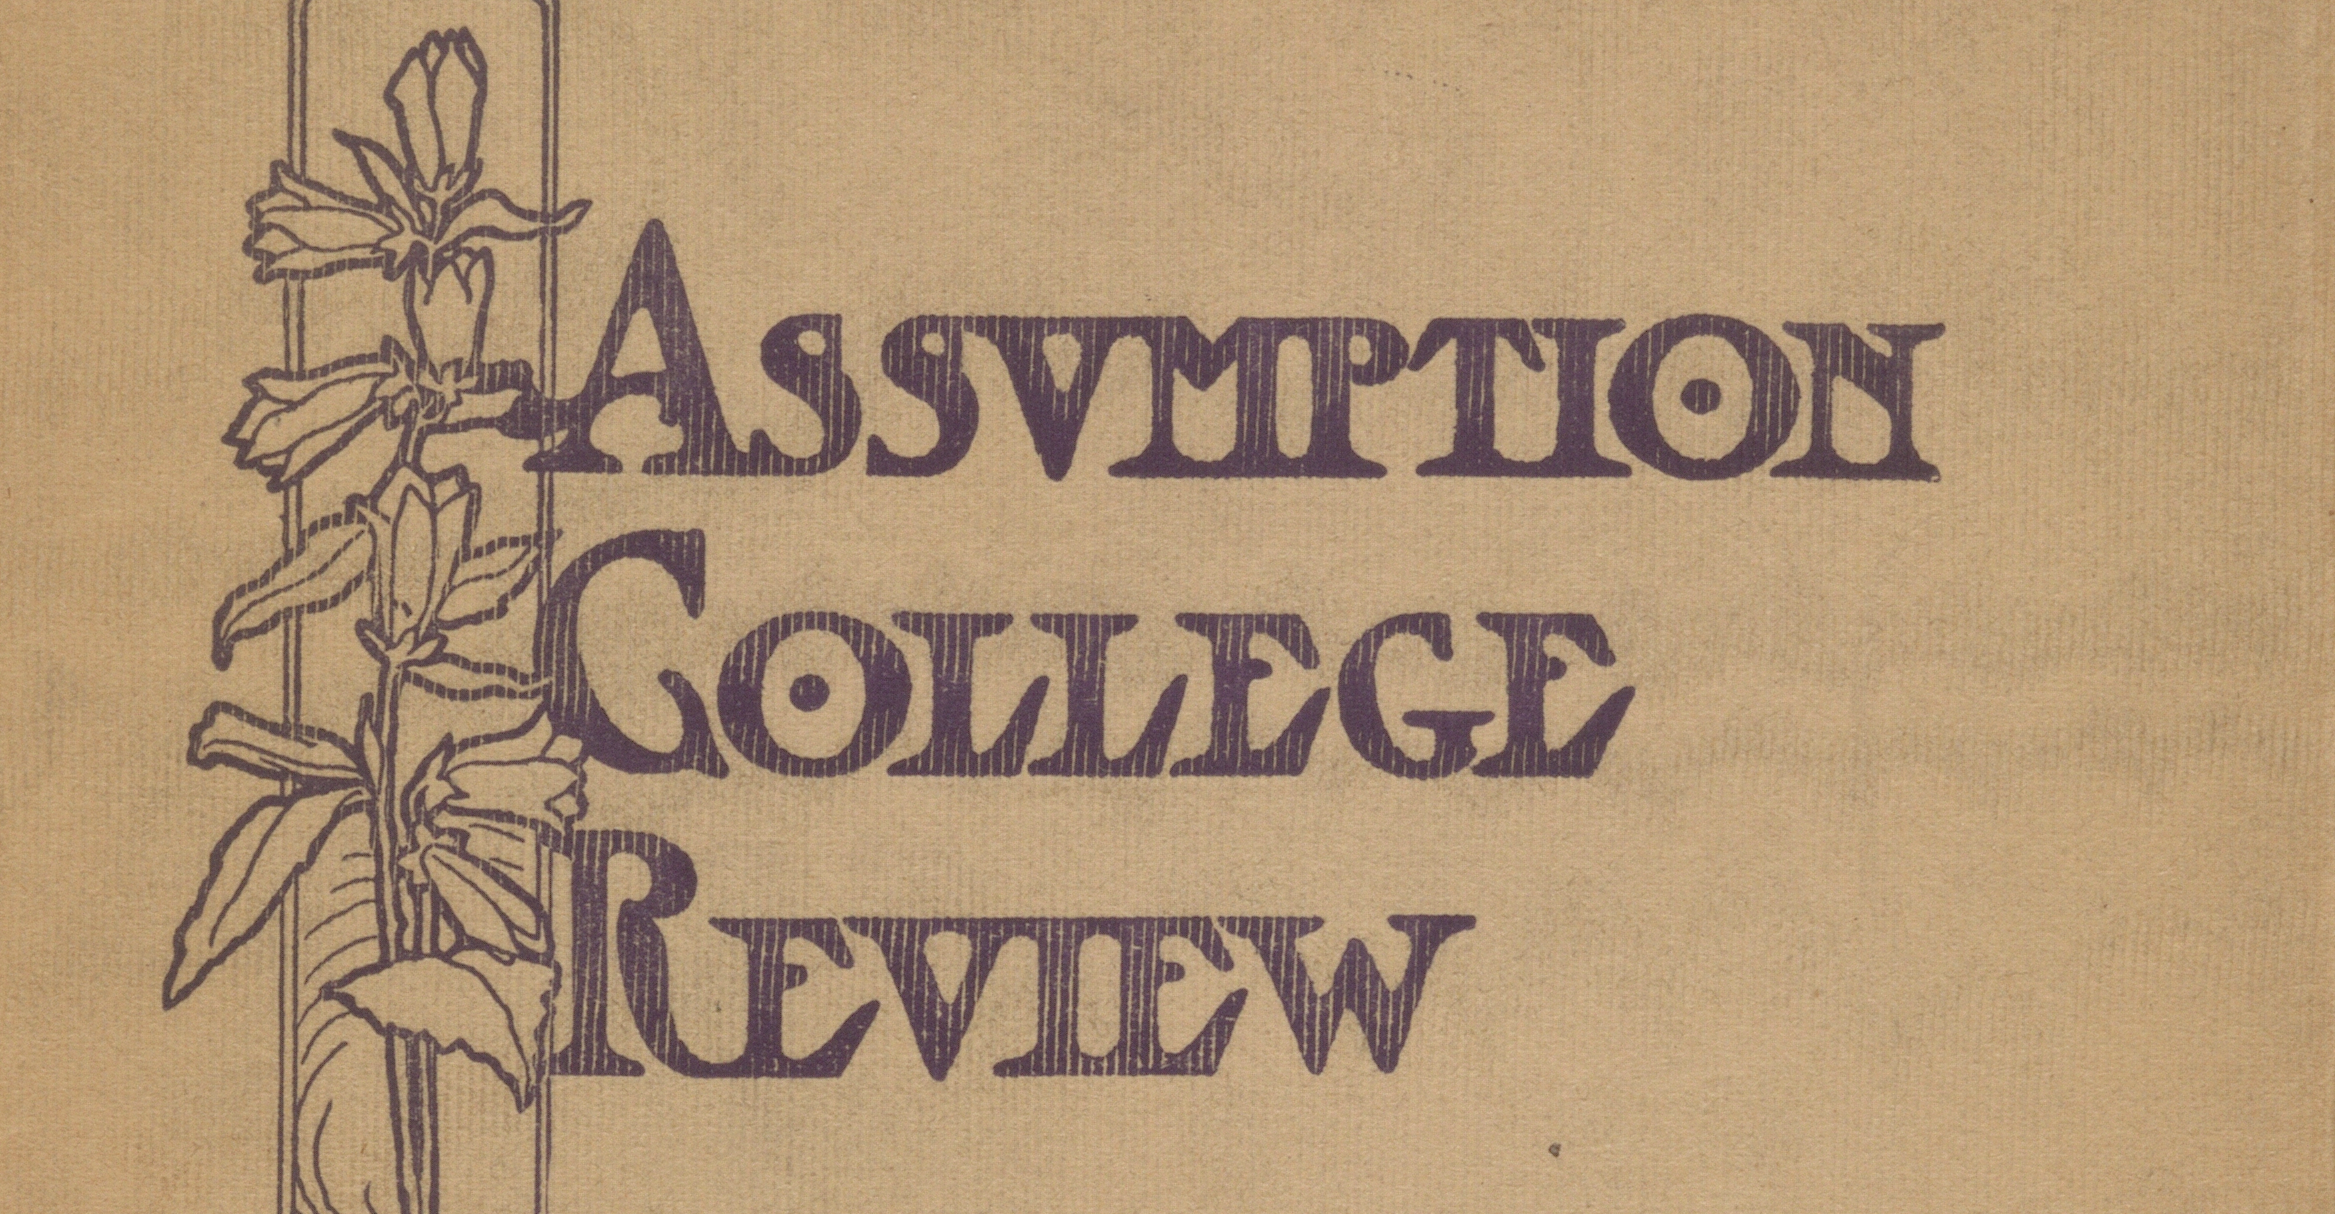 The Assumption College Review